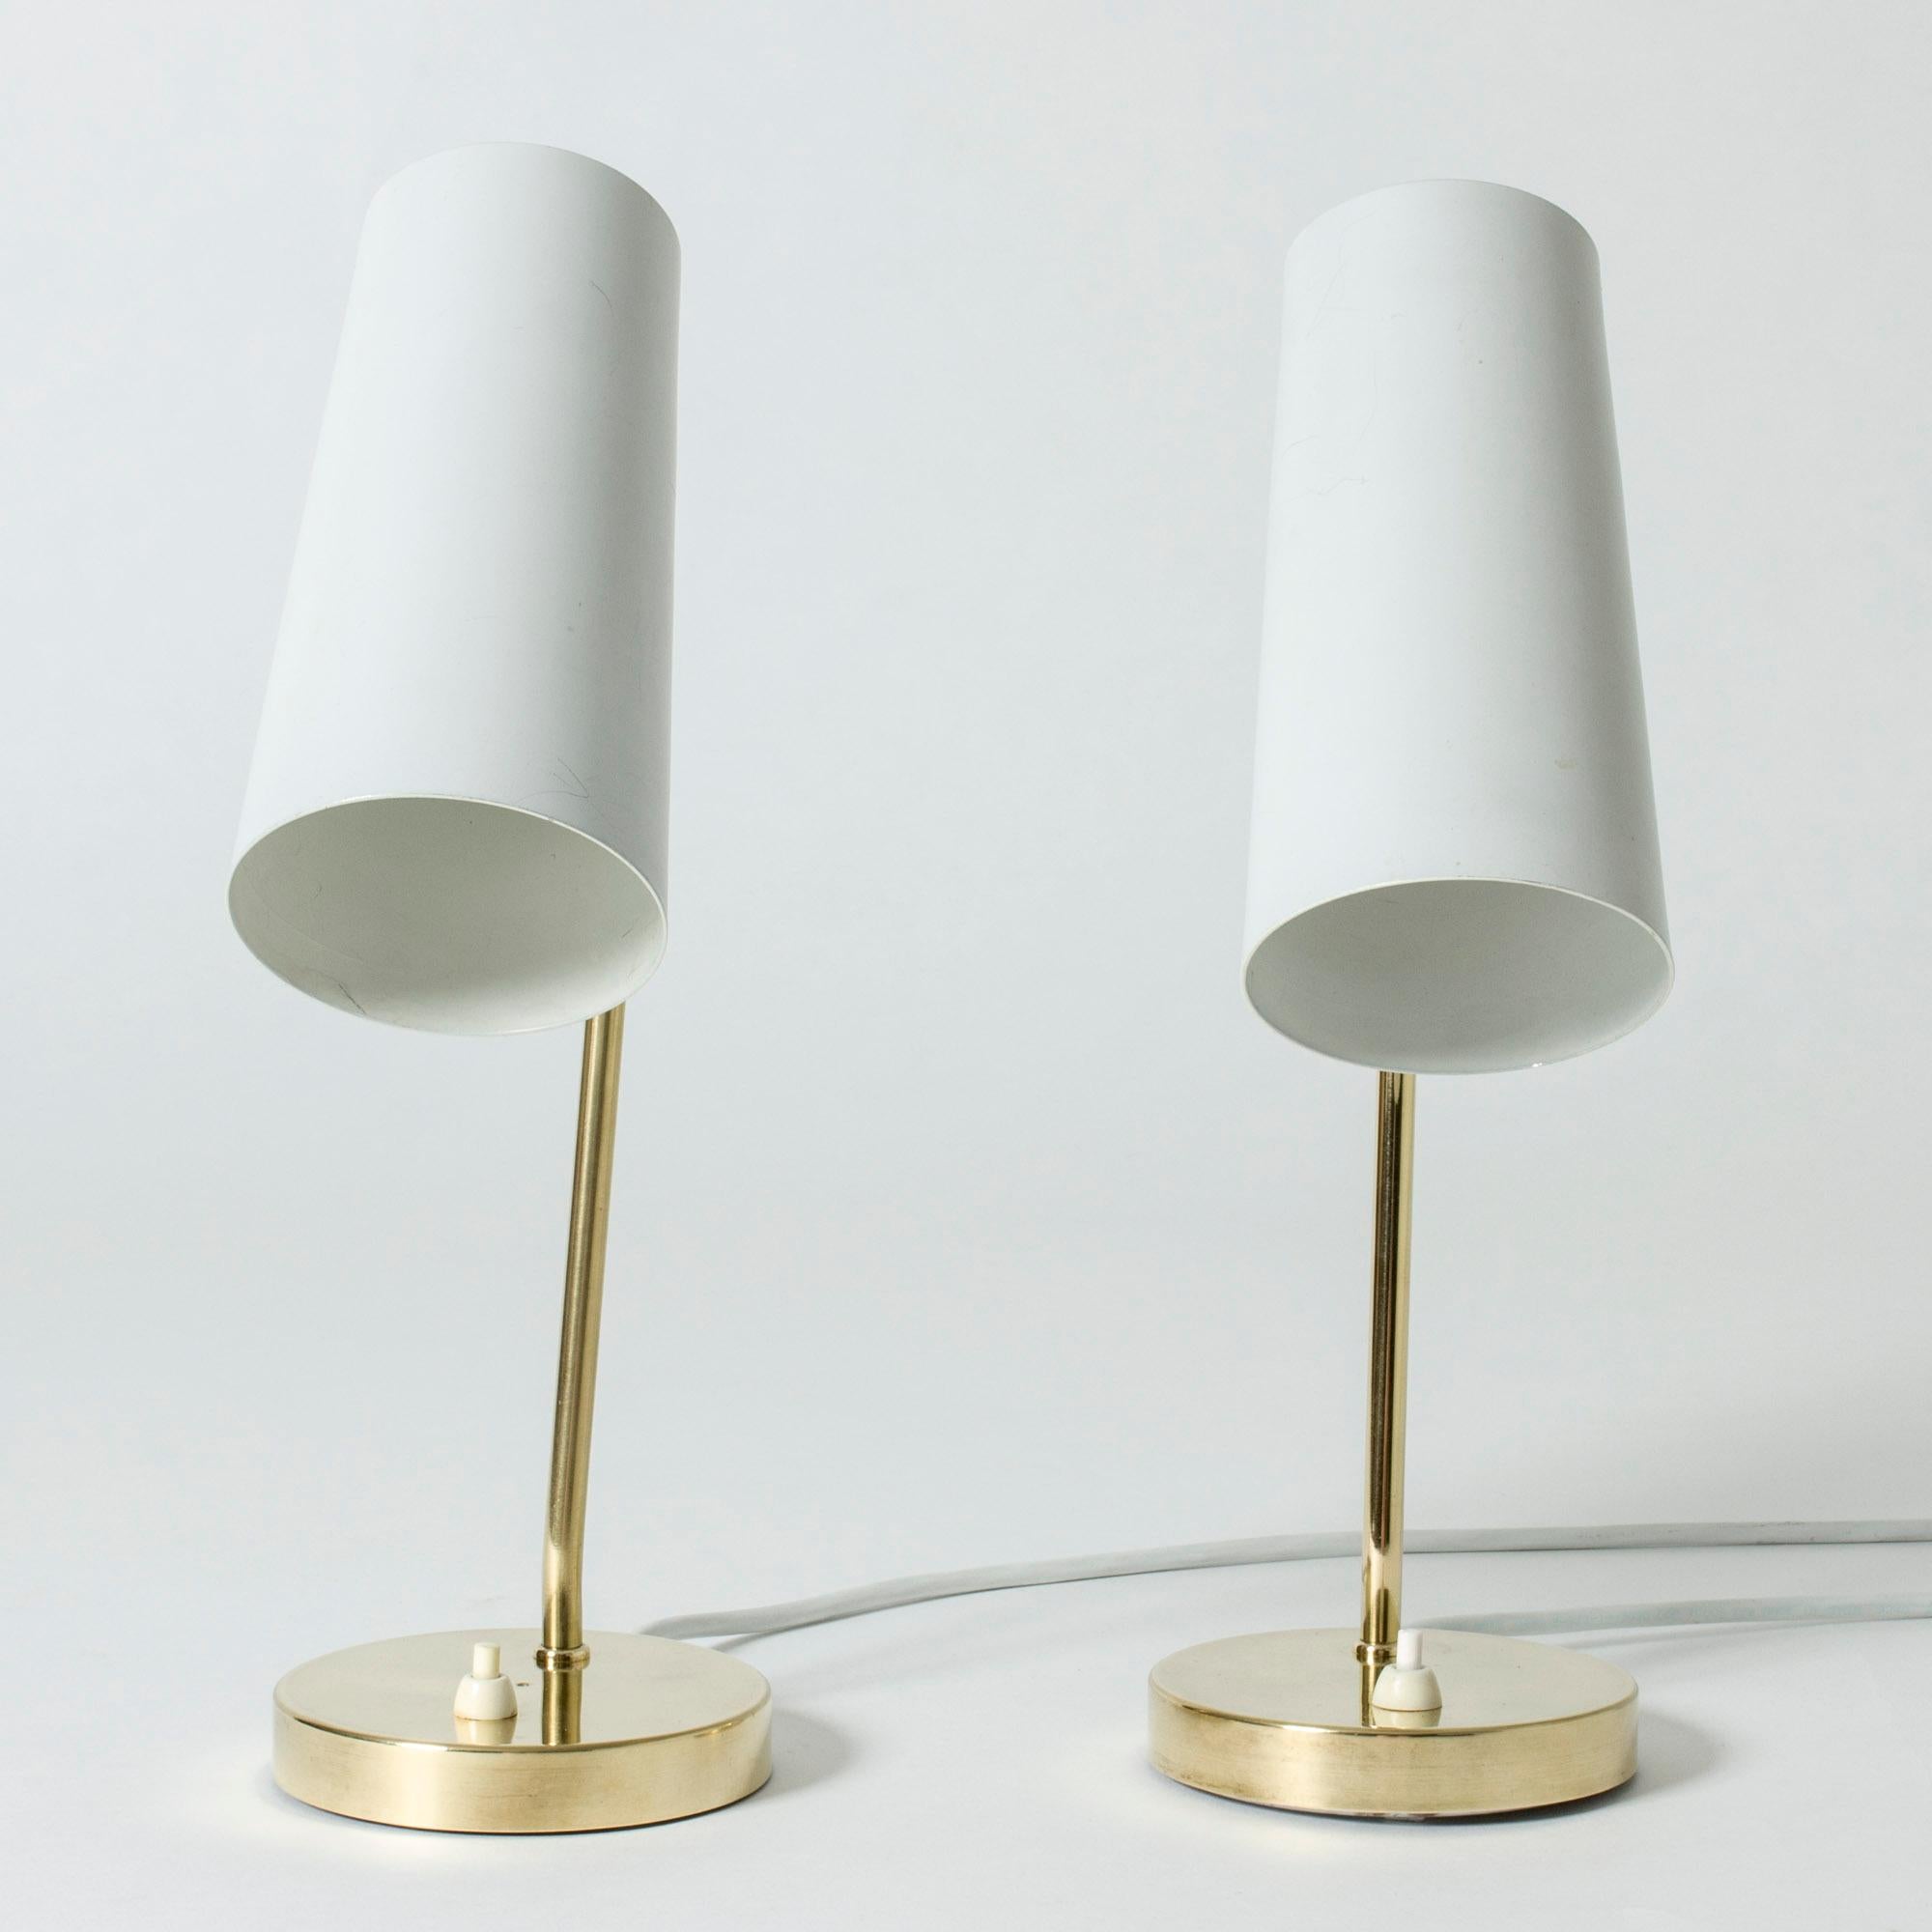 Pair of cool, sleek table lamps from Böhlmarks, made from brass with grey lacquered shades. Cylinder shaped shades that have wide holes at the top, letting out light elegantly.